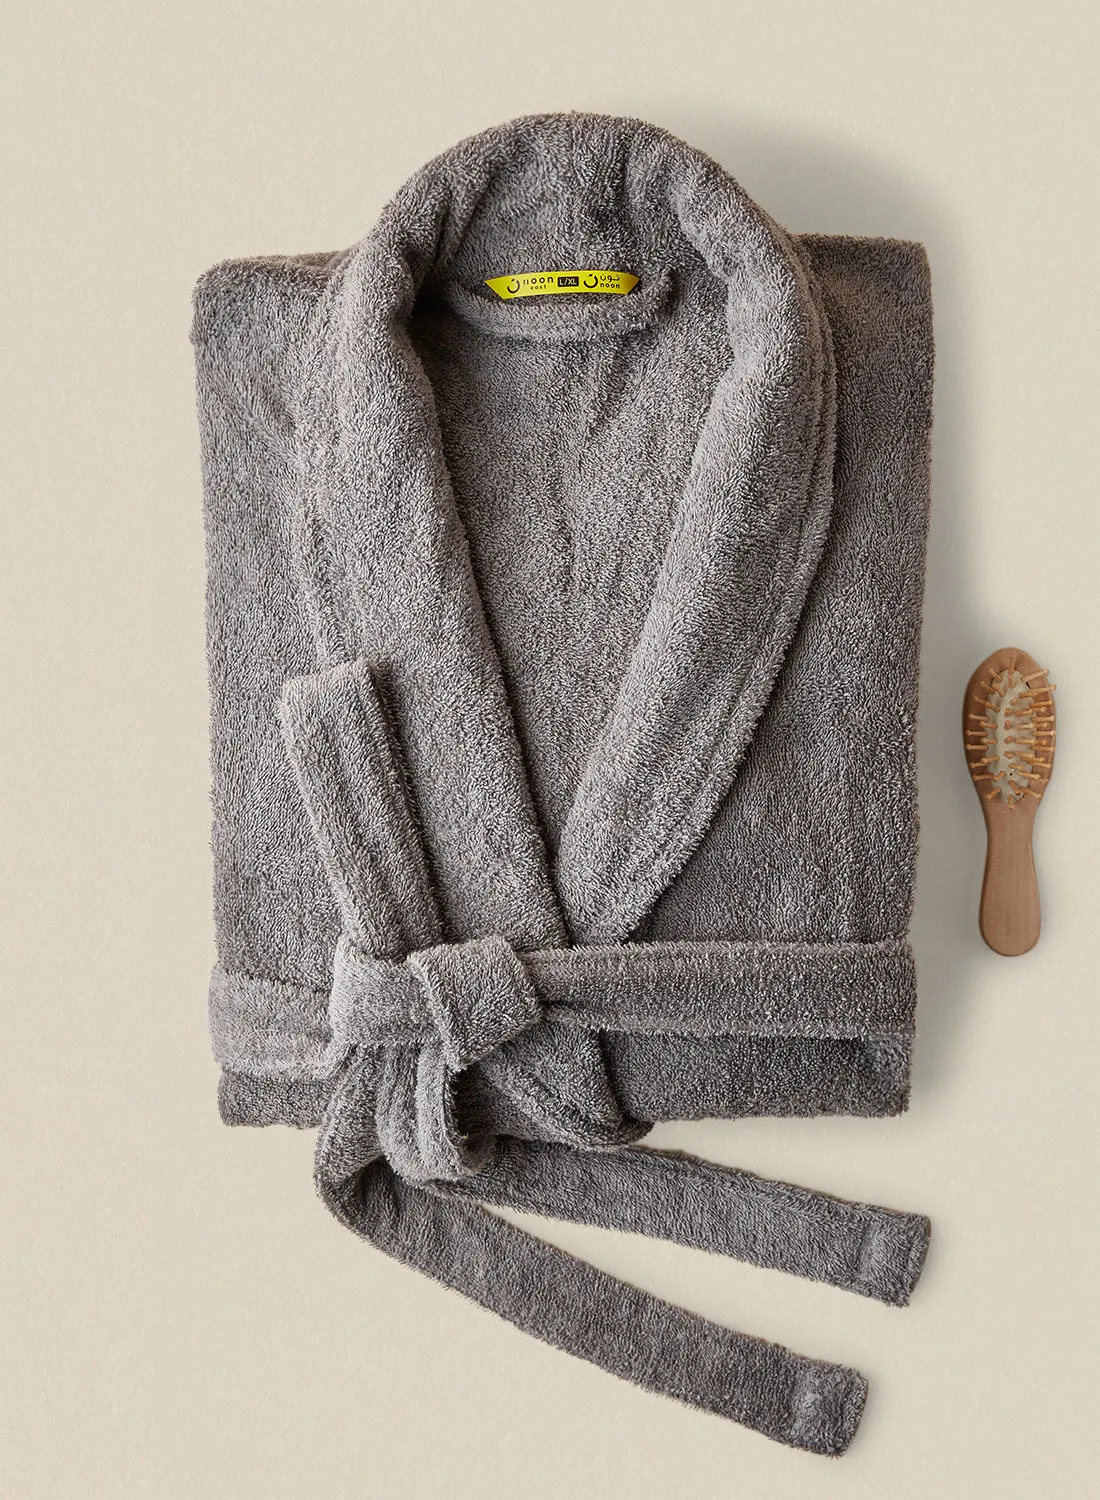 noon east Bathrobe - 380 GSM 100% Cotton Terry Silky Soft Spa Quality Comfort - Shawl Collar & Pocket - Mountain Grey Color - 1 Piece